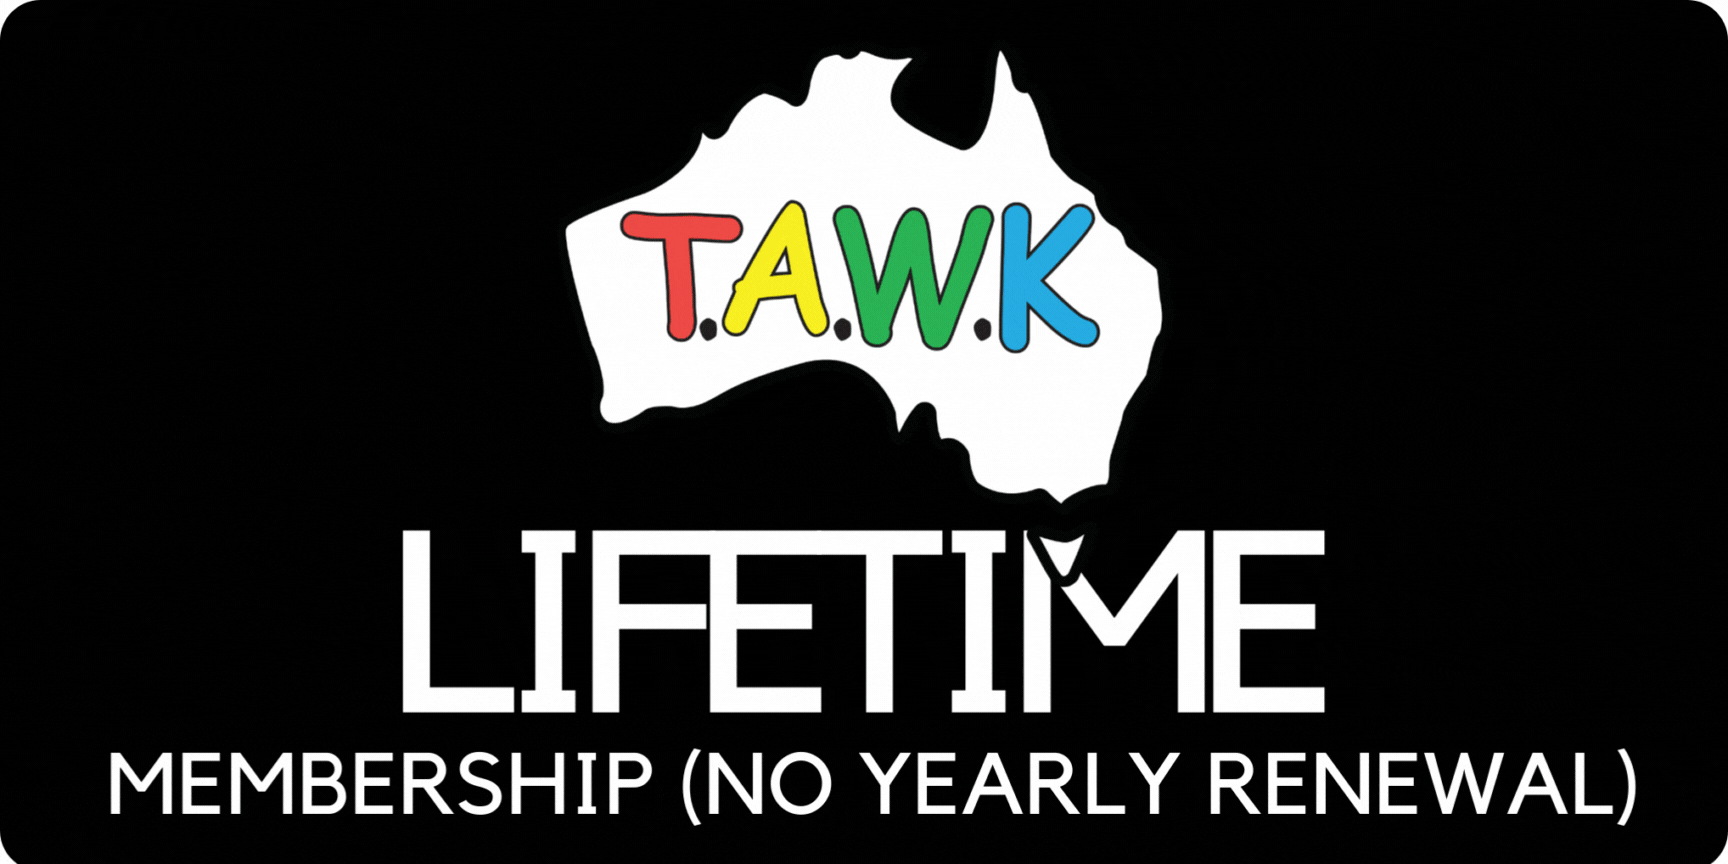 We knew you needed cheaper camping, paying so much extra for the kids really adds up, so we did something about it and now you can grab the TAWK Membership card and take advantage of the savings.